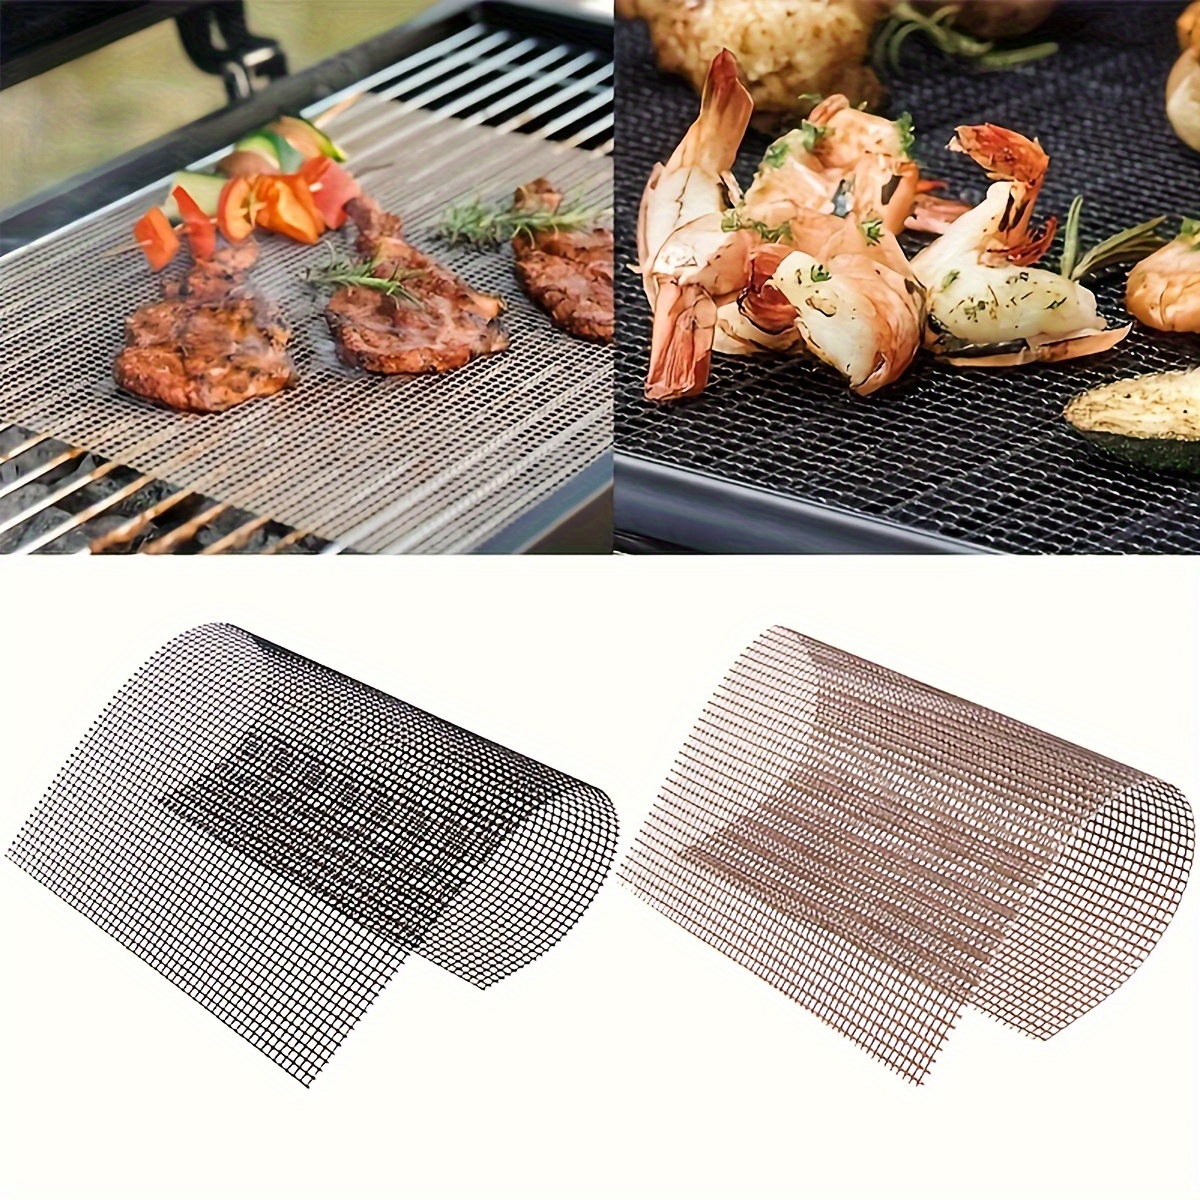 

1/2pcs, Bbq Mesh Grill Mat, Nonstick Mesh Grilling Mats, Reusable Grilling Mats For Electric Grill, Gas, And Charcoal, Portable Mesh For Fish, Shrimp, Meat, Vegetables And Fries, Barbecue Accessories